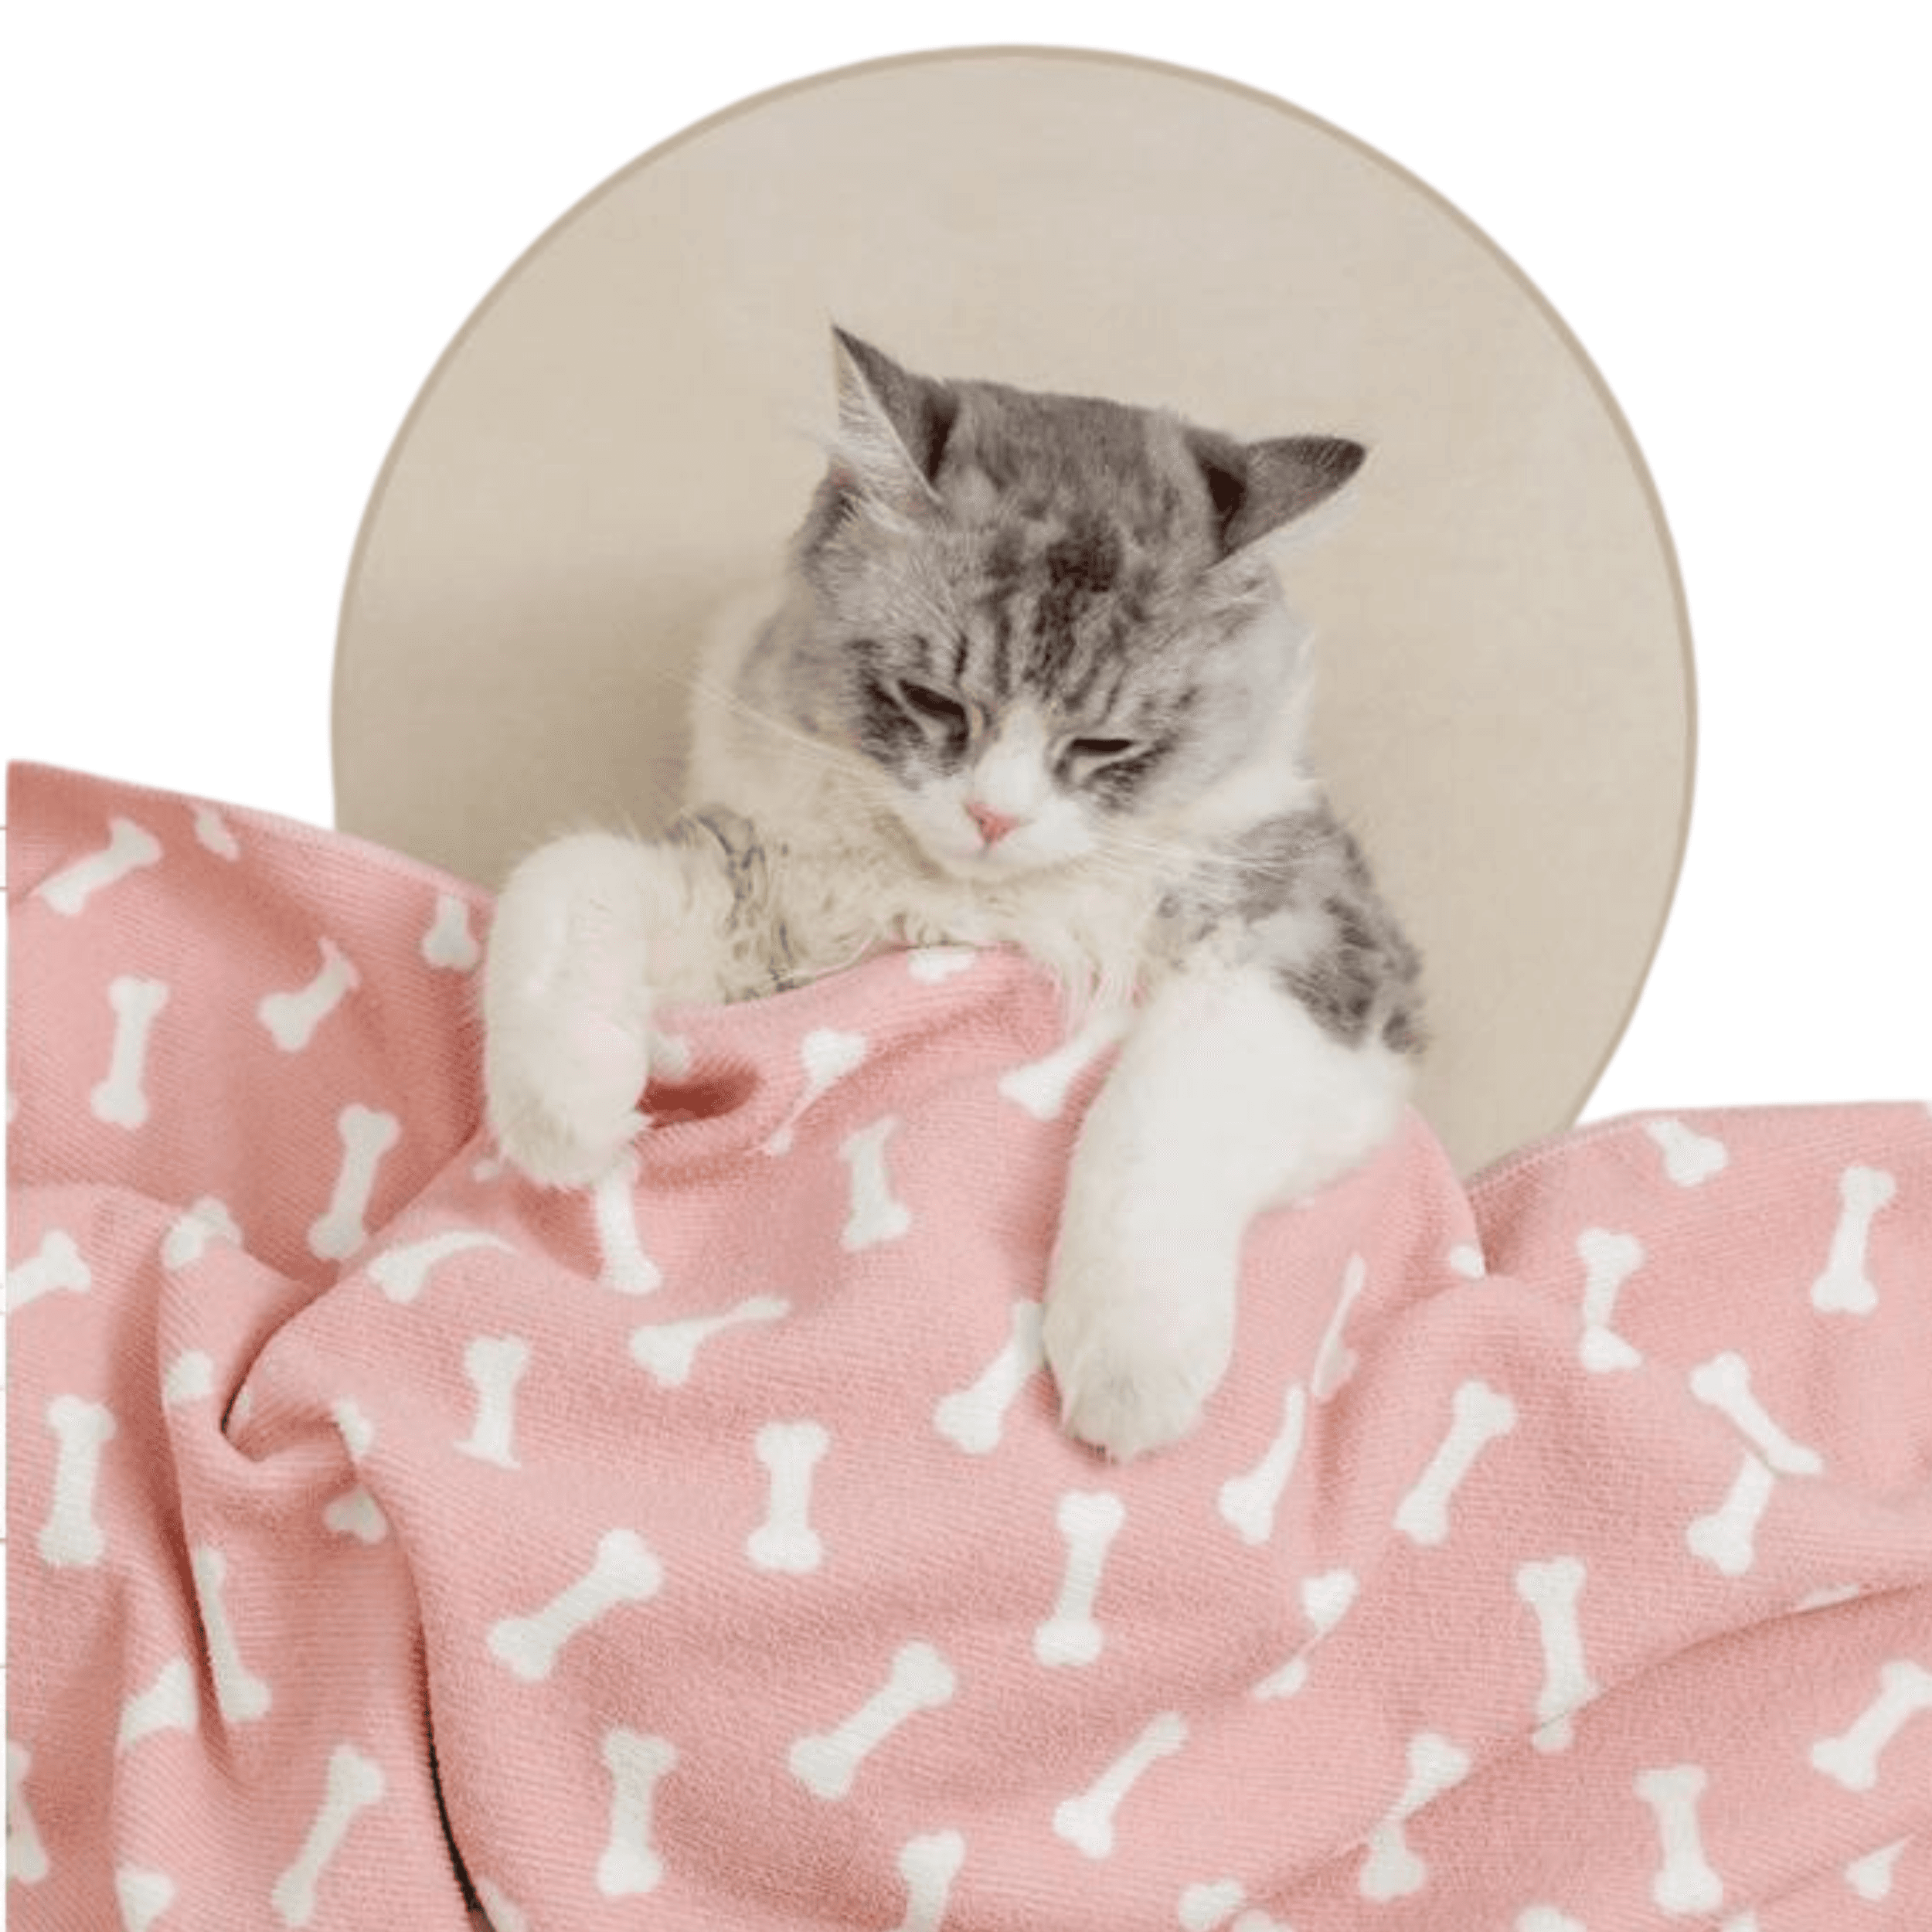 Bath towel for dog and cat - pink